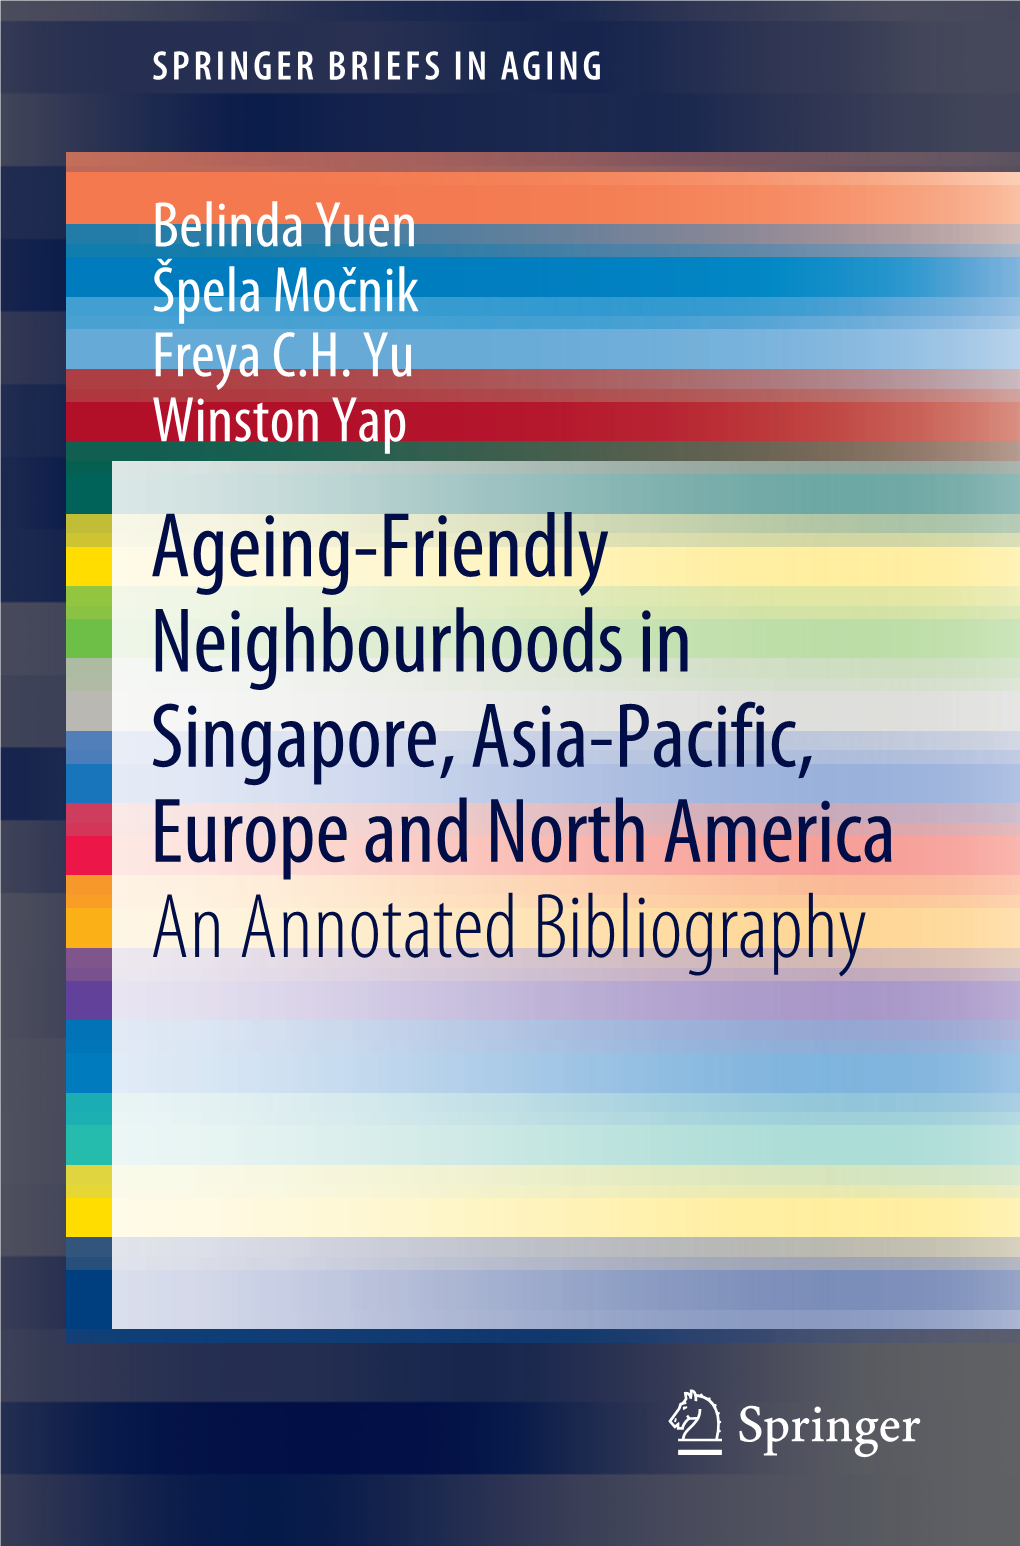 Ageing-Friendly Neighbourhoods in Singapore, Asia-Pacific, Europe